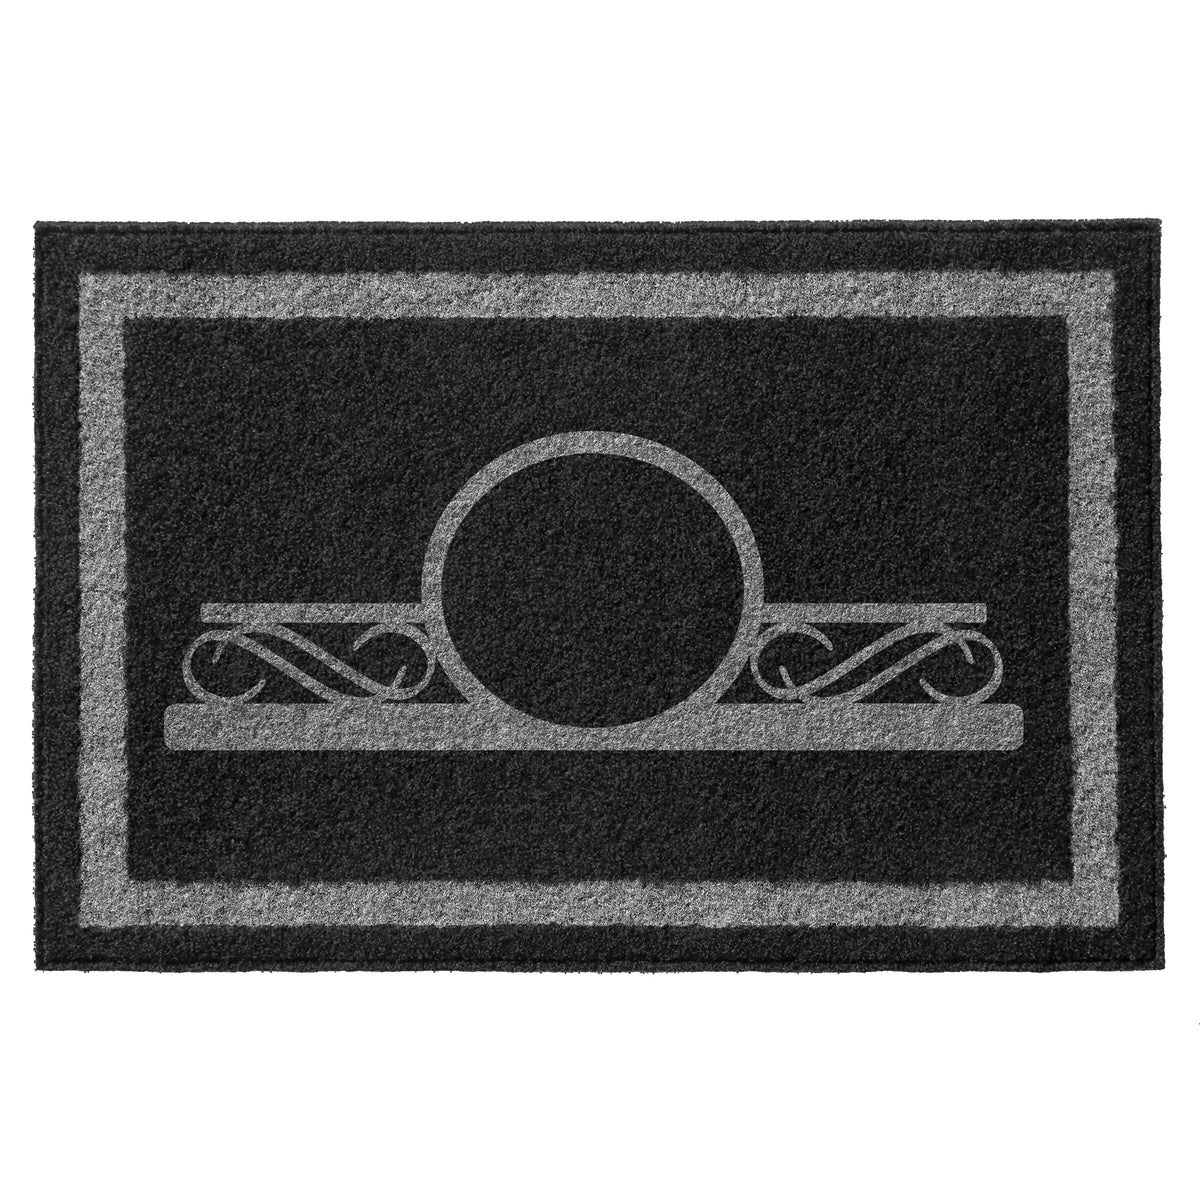 Infinity Custom Mats™ All-Weather Personalized Door Mat - STYLE: MONOGRAM   COLOR:  BLACK / GREY - rugsthatfit.com